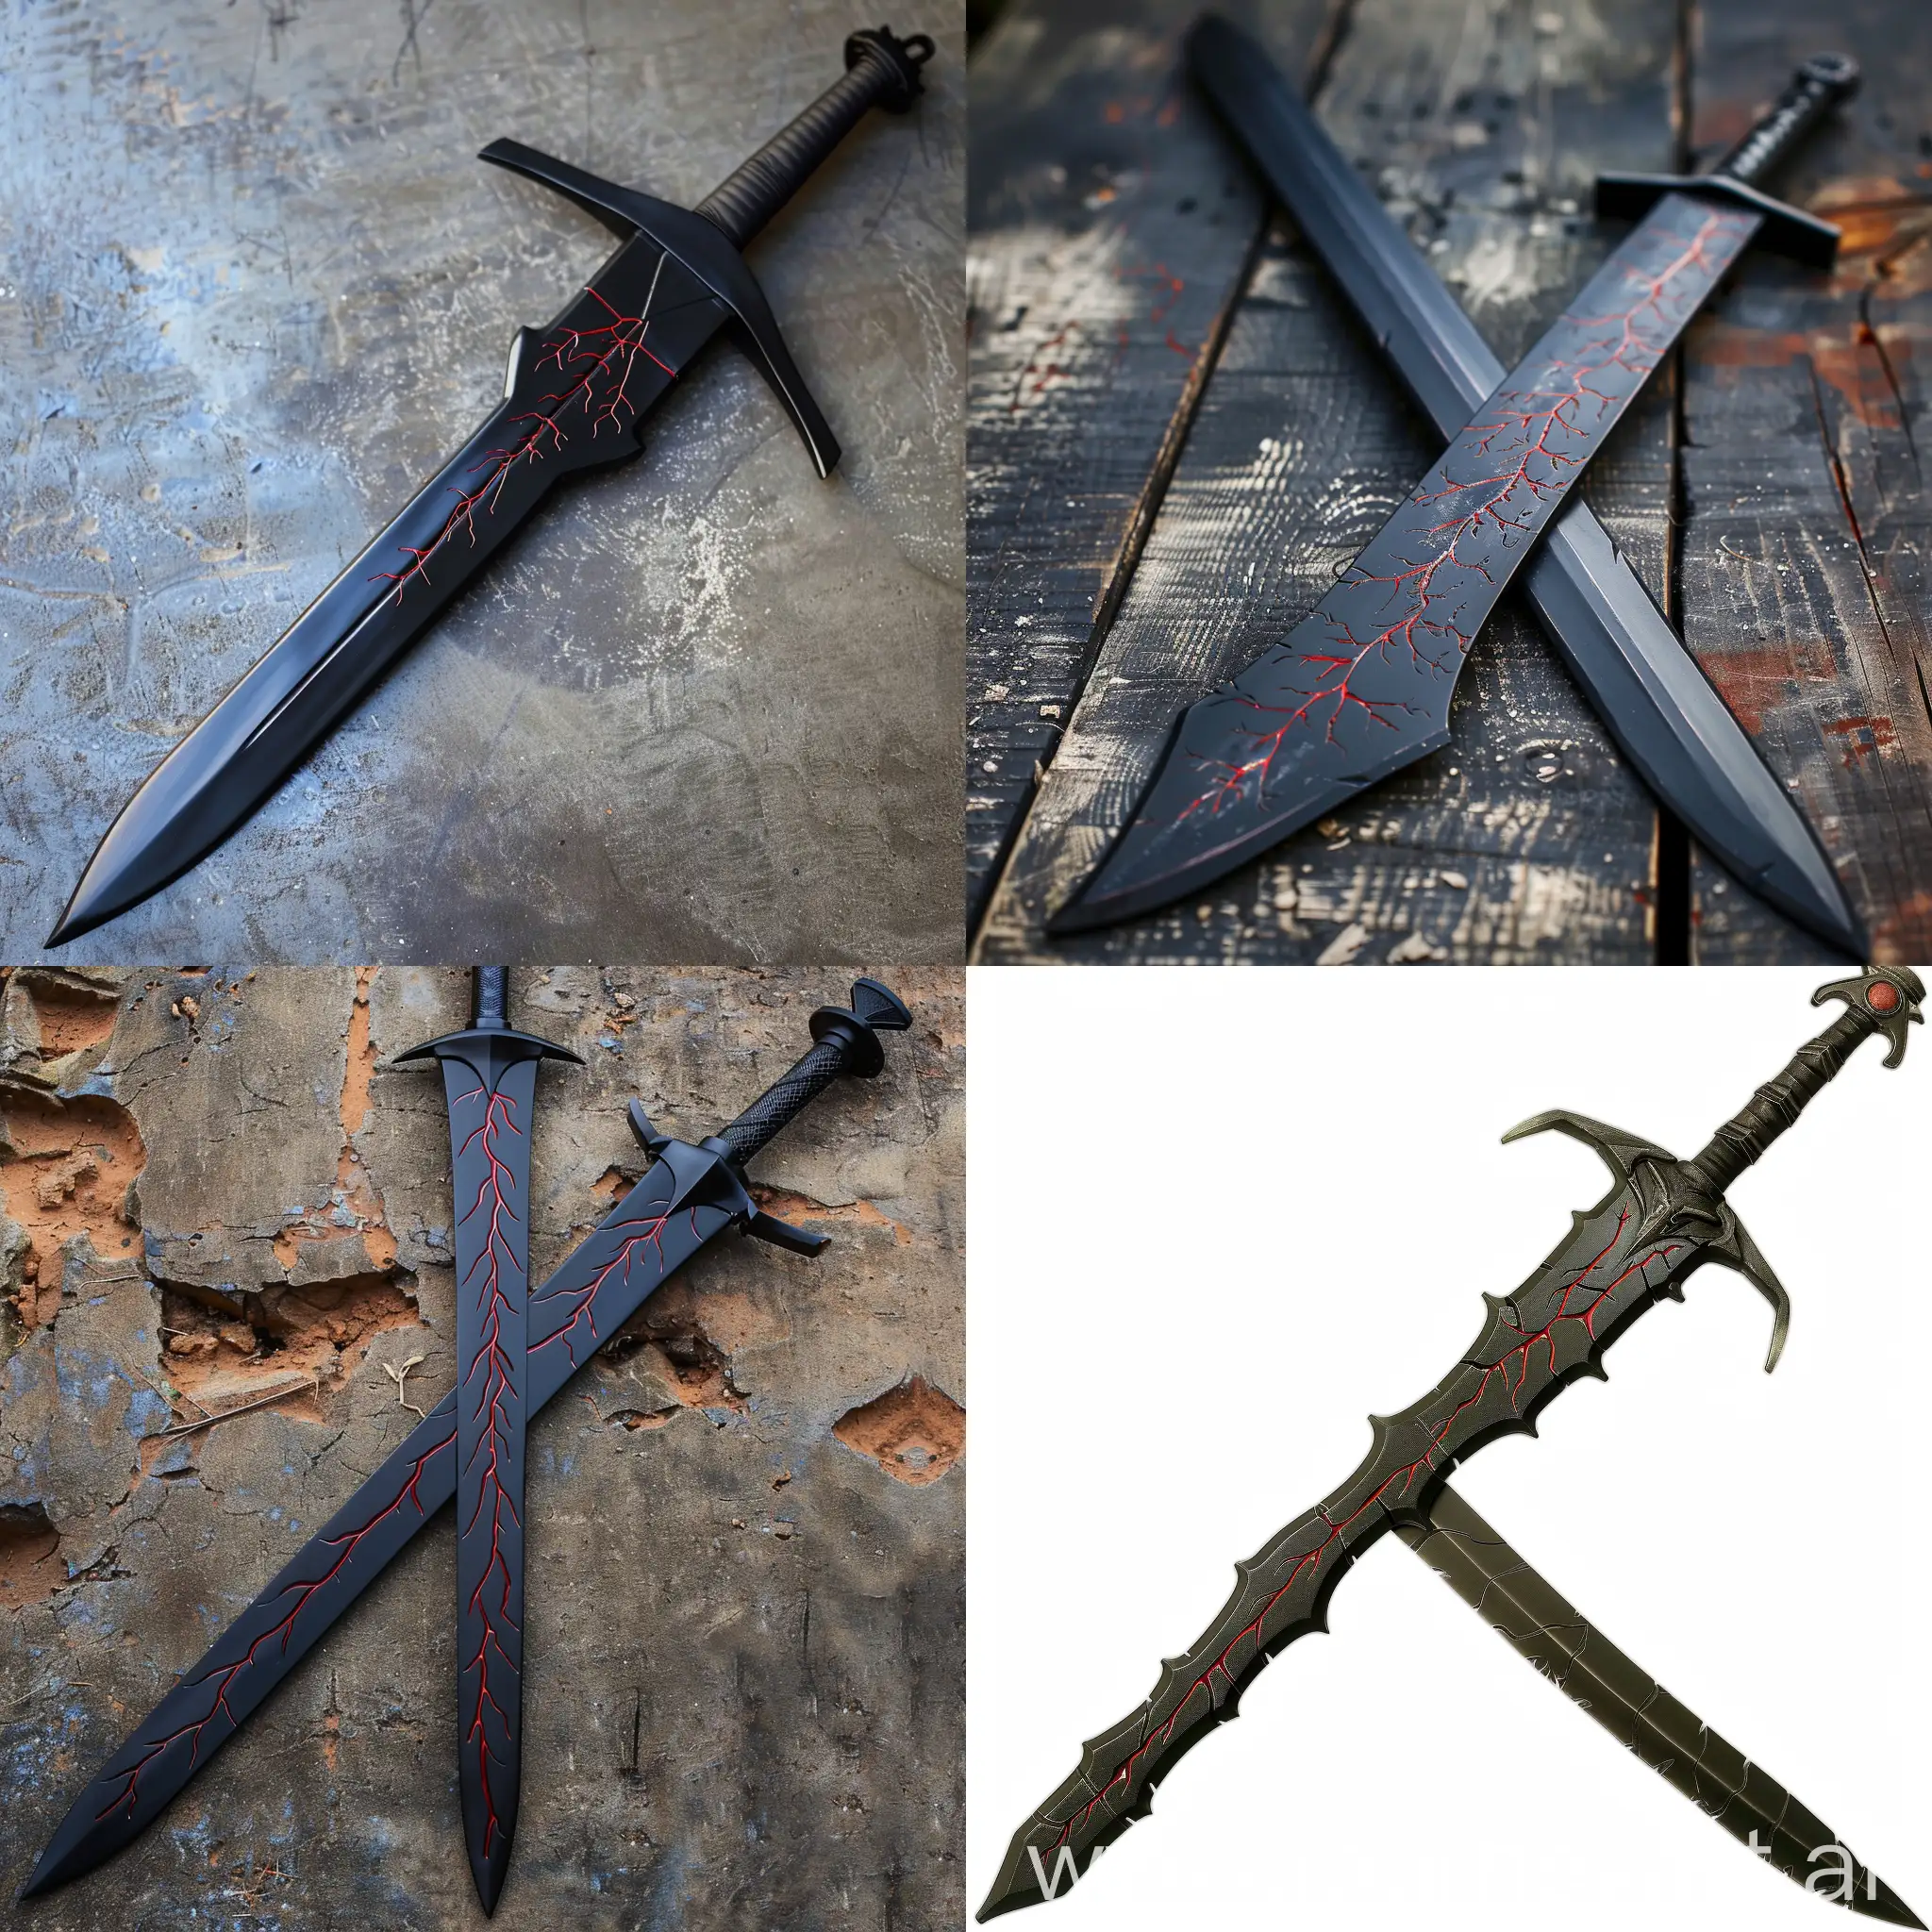 A black sword with red veins on the blade
